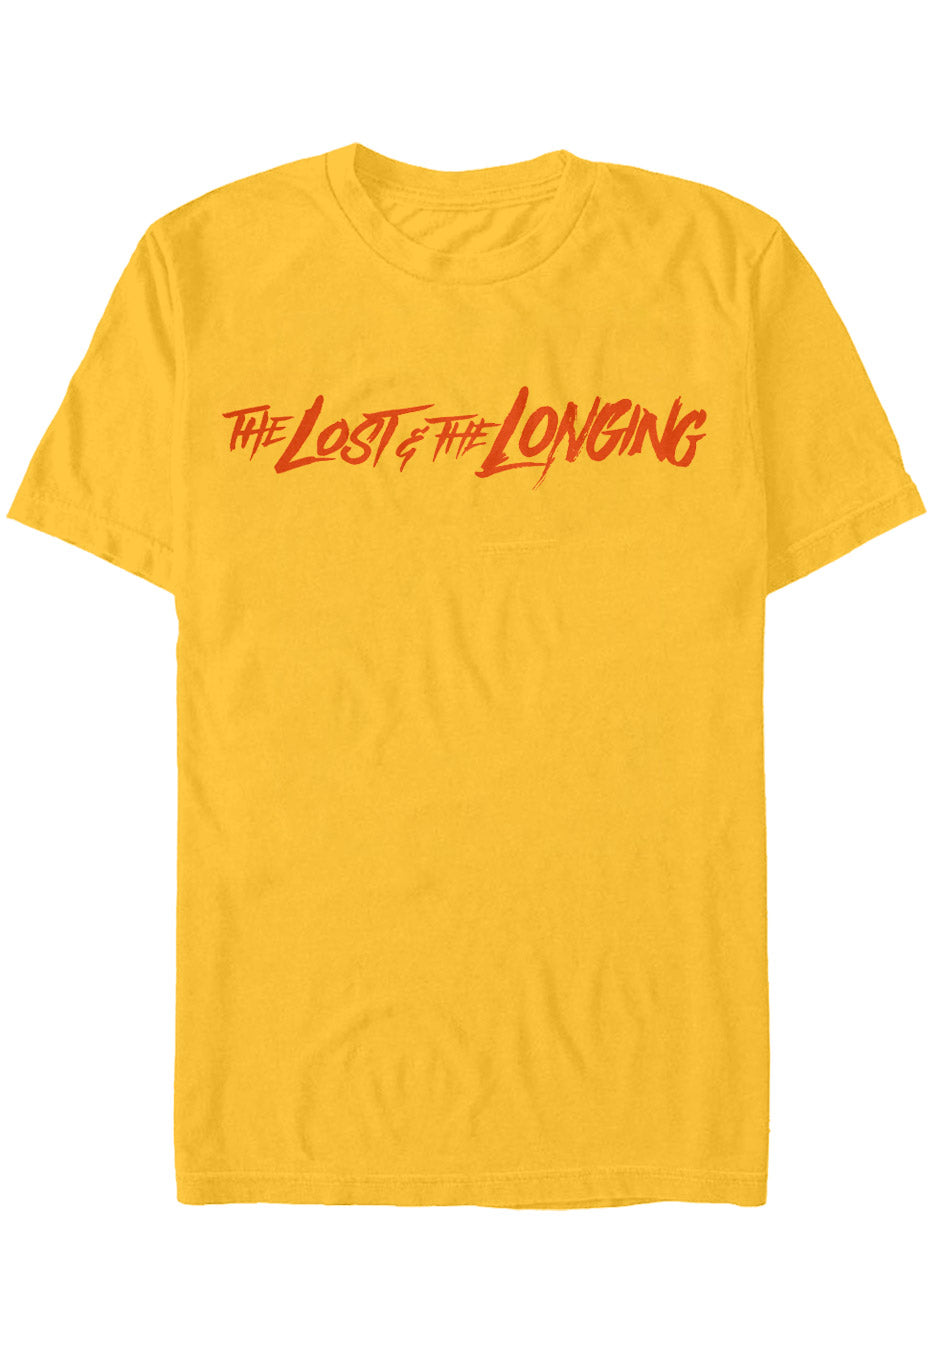 Alpha Wolf & Holding Absence - The Lost & The Longing Gold - T-Shirt | Neutral-Image